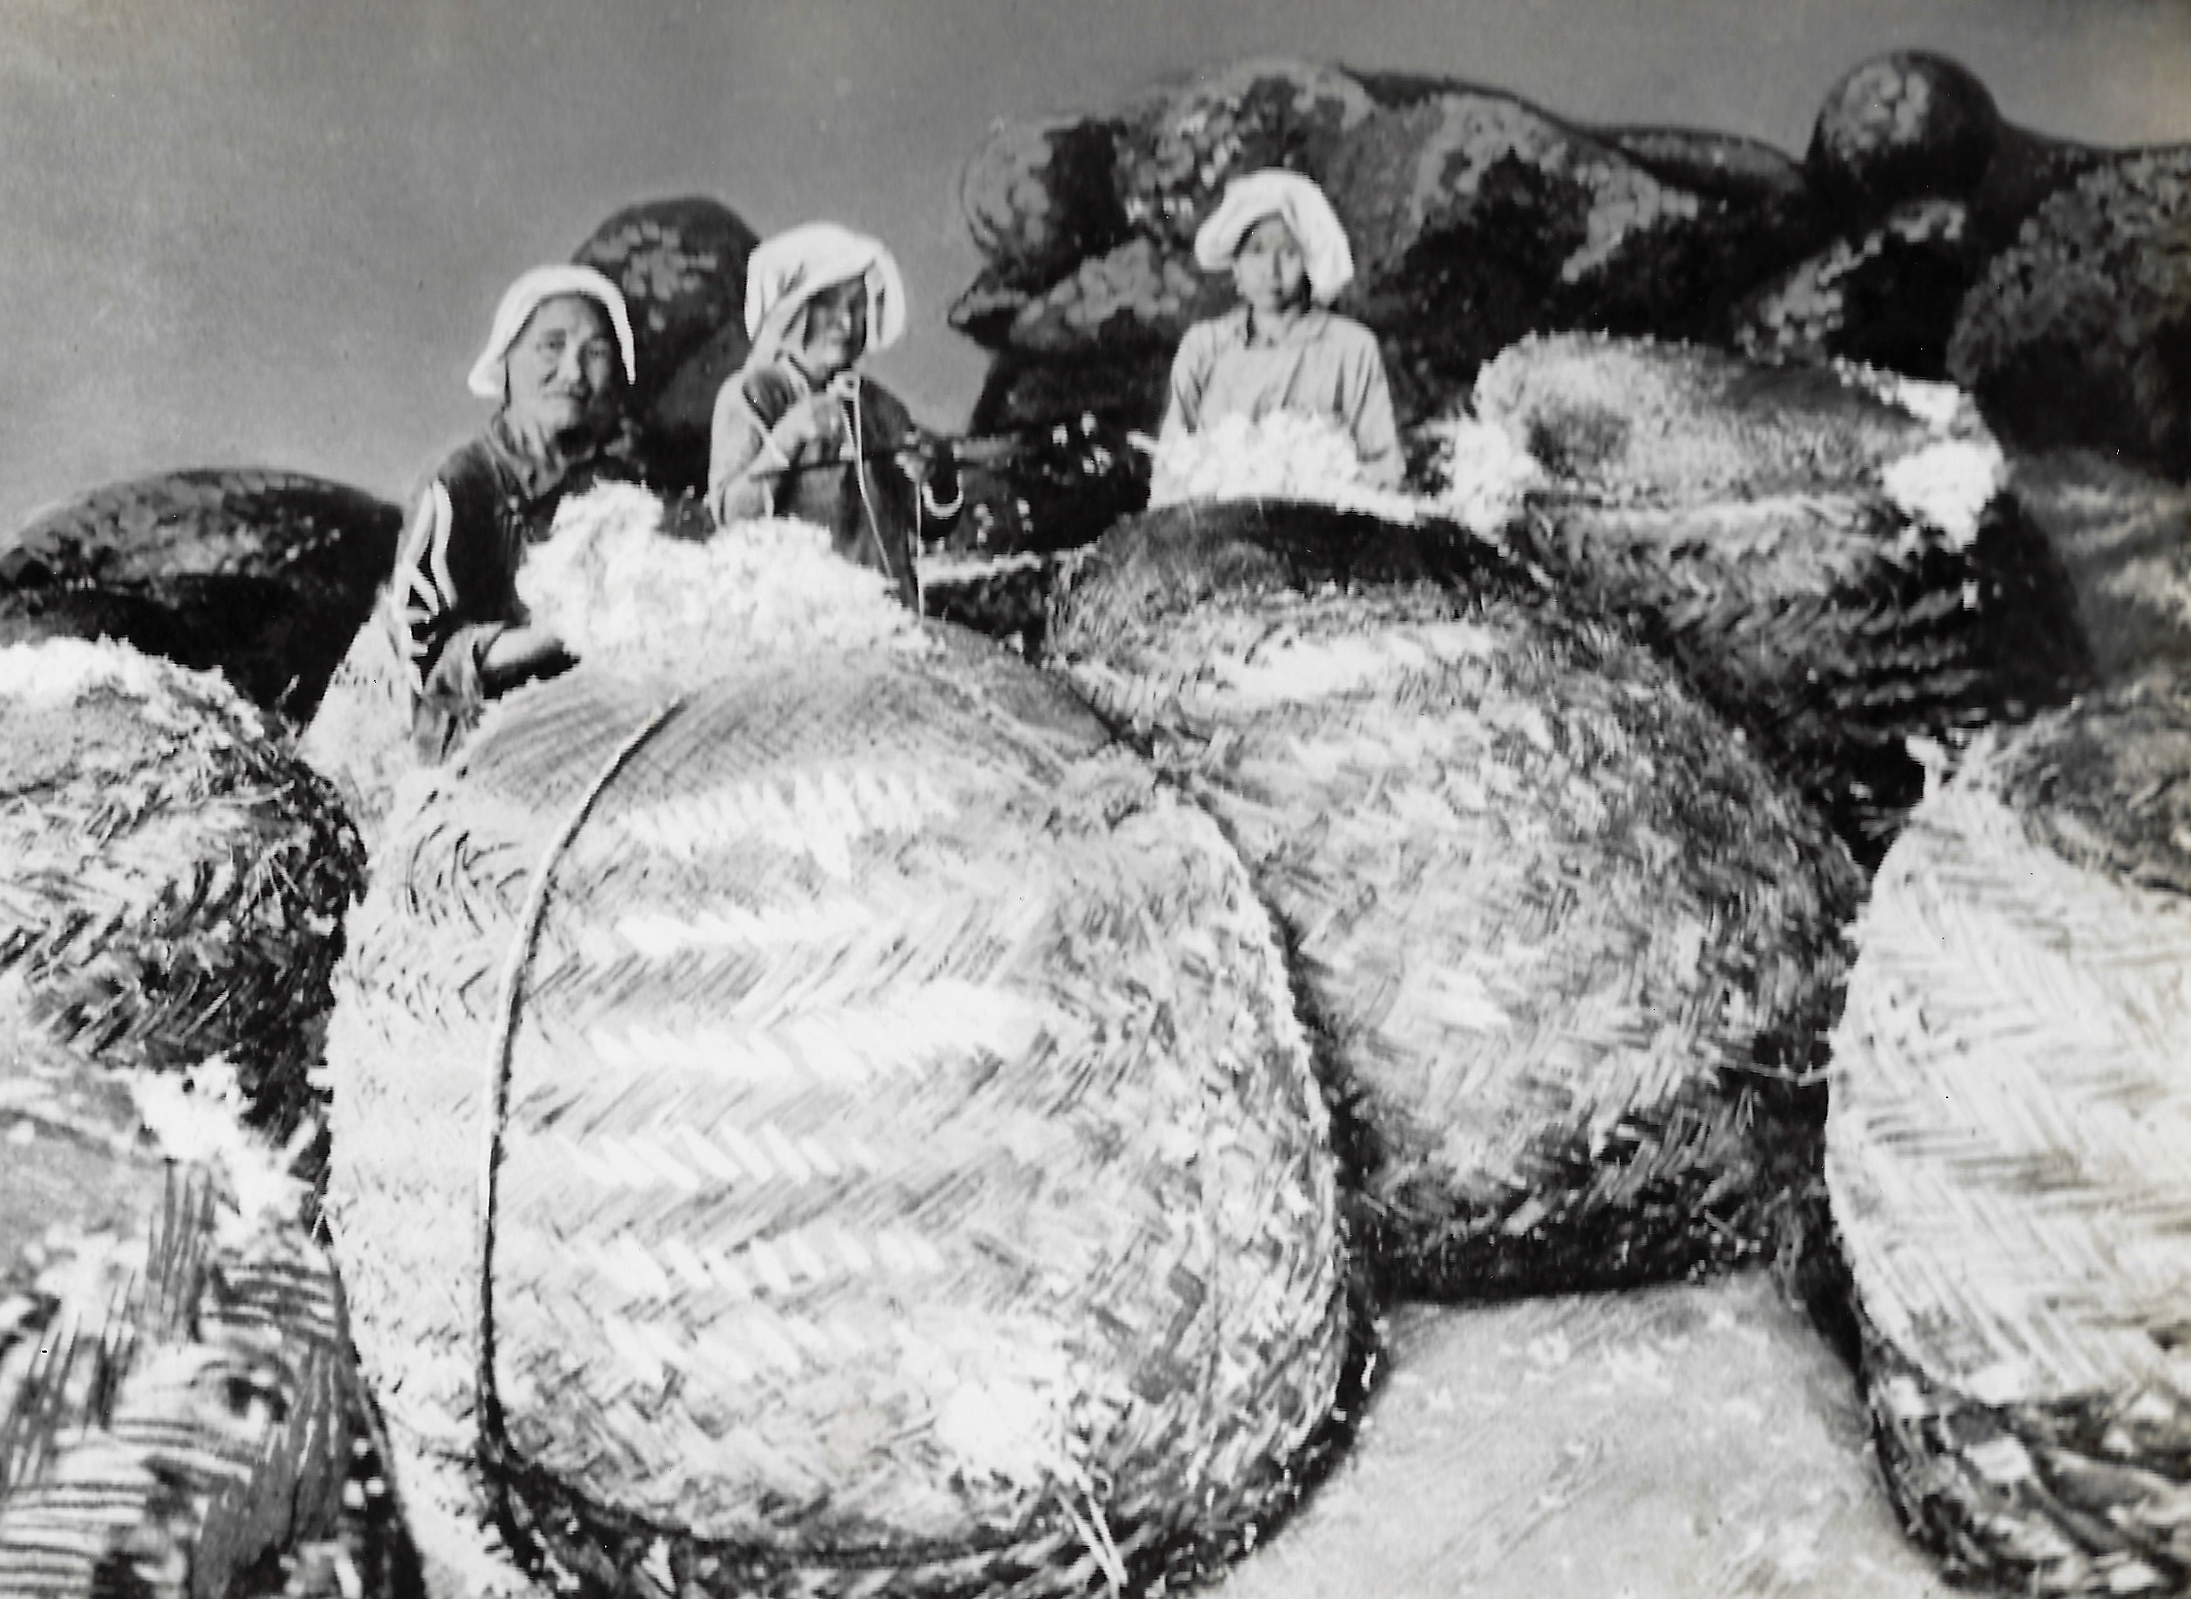 Bales of feathers in China c.1930